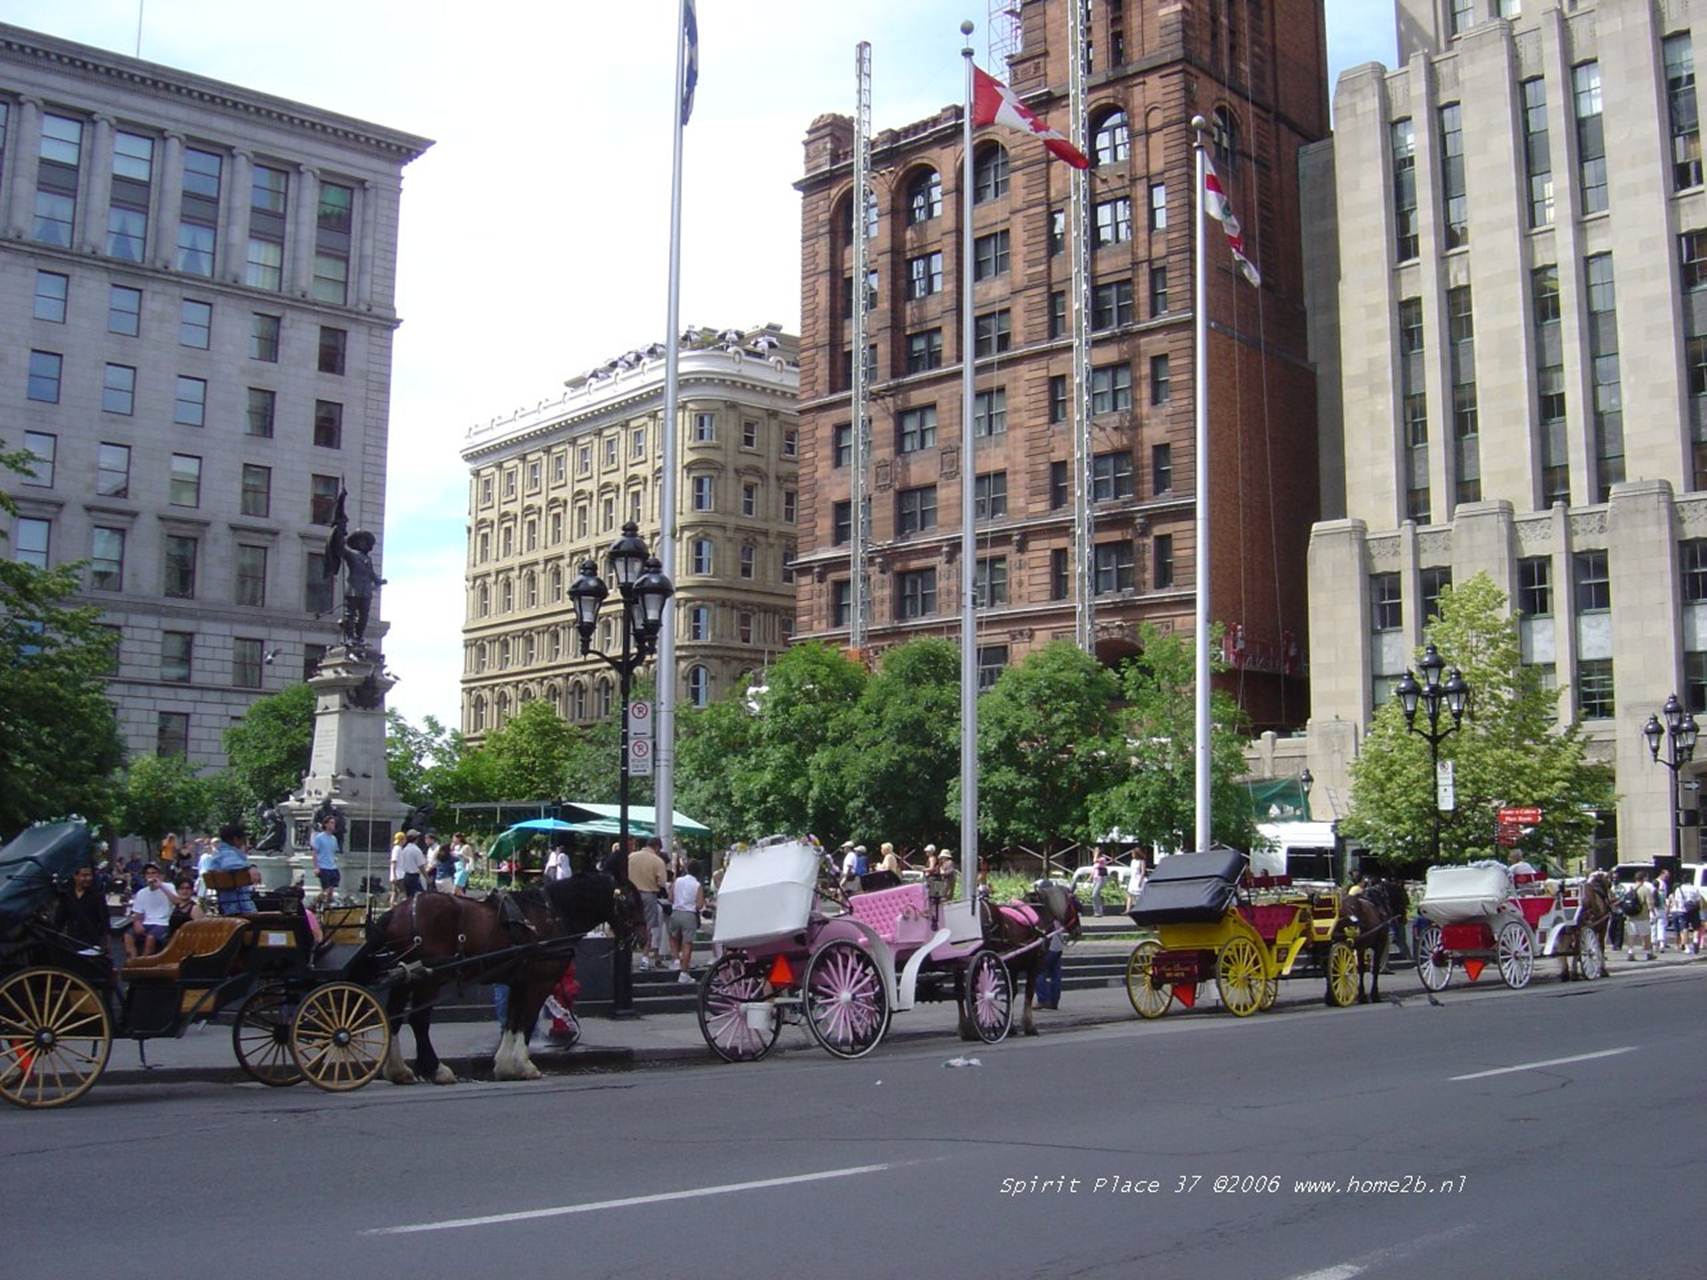 Beschrijving: 37-montreal-square-with-horses-1280pix-85perc